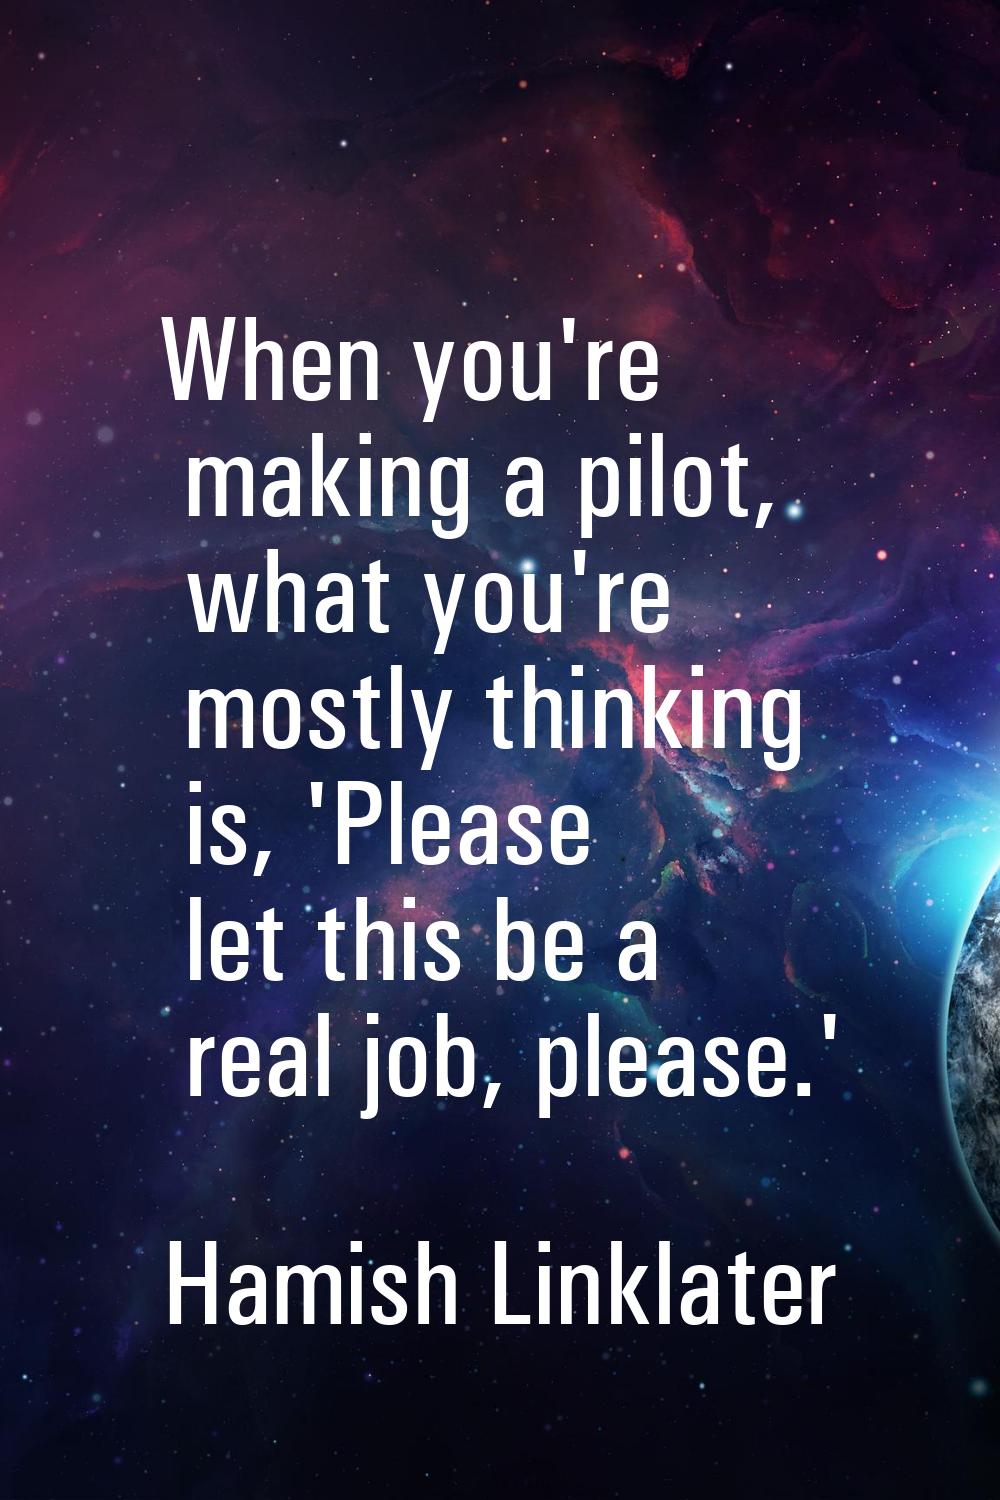 When you're making a pilot, what you're mostly thinking is, 'Please let this be a real job, please.